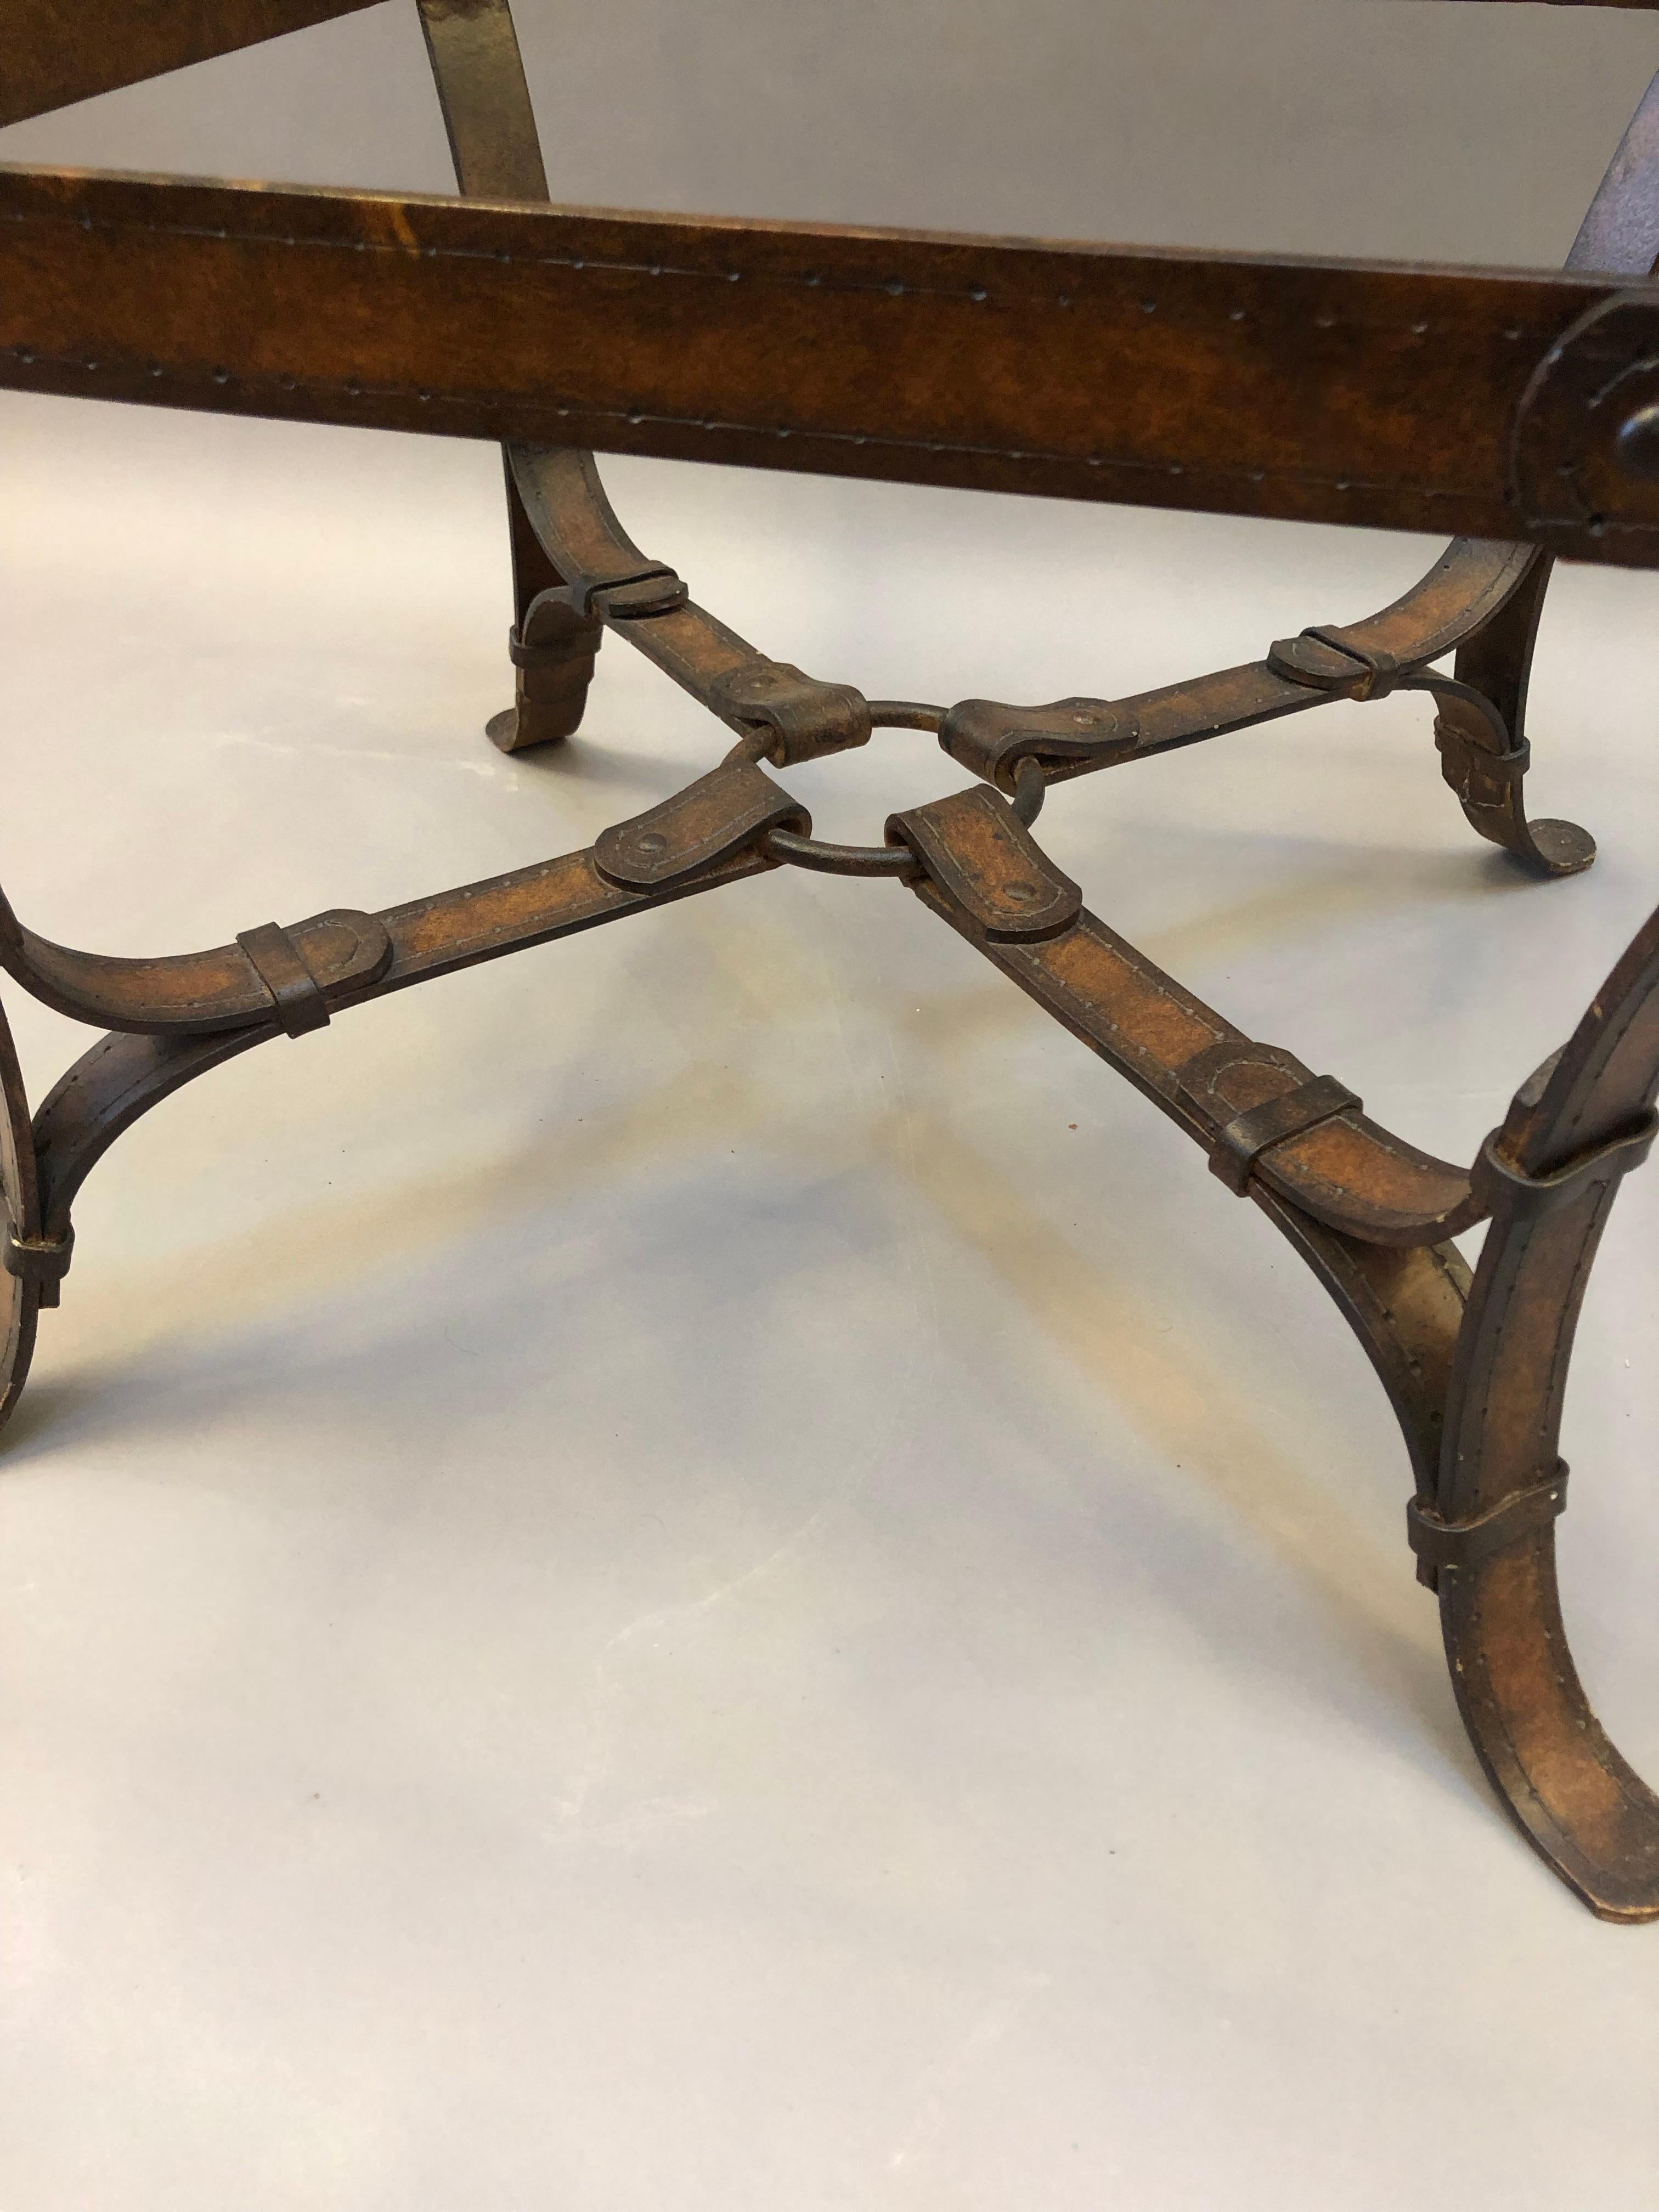 20th Century Equestrian Style Iron and Glass Side Table with Faux Leather Strap Base